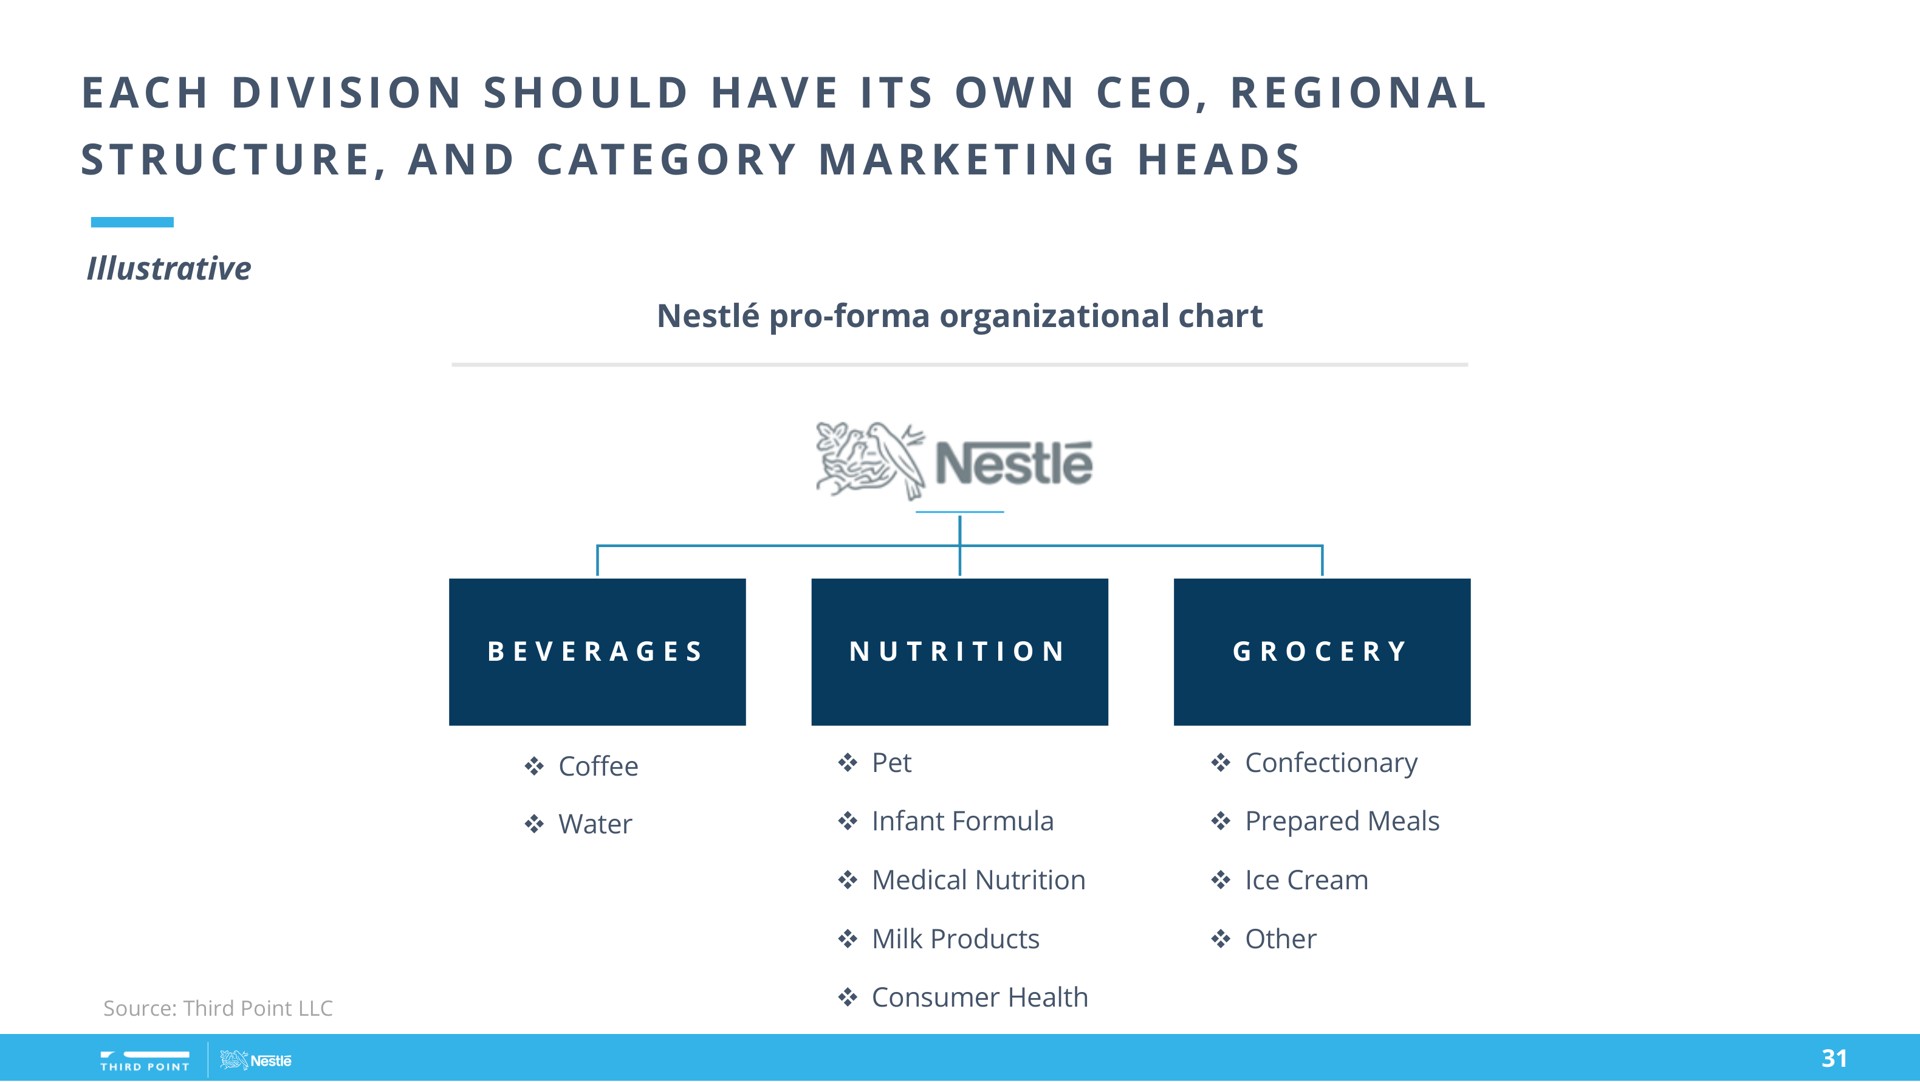 i i i i i a a at a i a each division should have its own regional structure and category marketing heads | Third Point Management